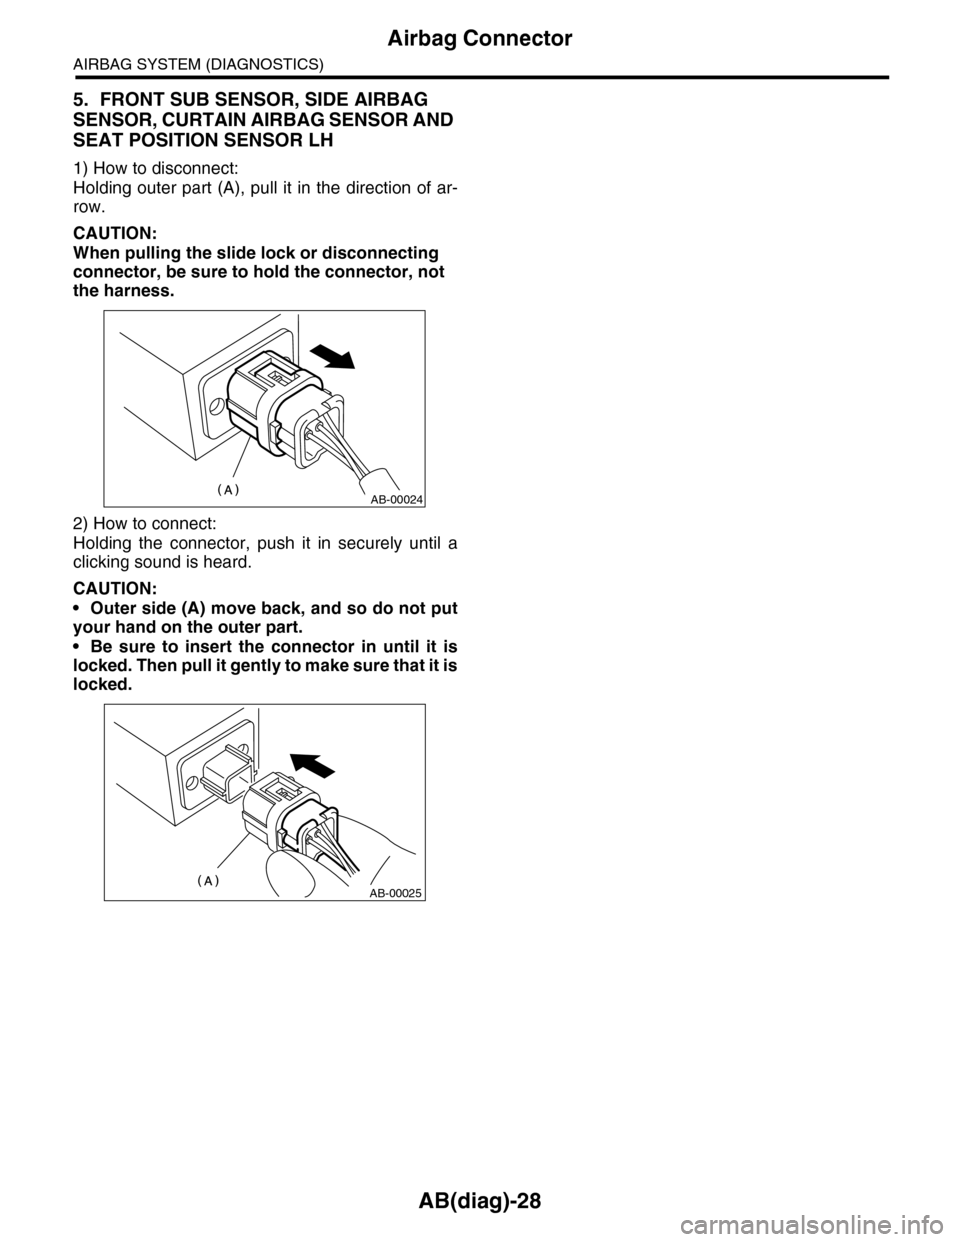 SUBARU TRIBECA 2009 1.G Service Workshop Manual AB(diag)-28
Airbag Connector
AIRBAG SYSTEM (DIAGNOSTICS)
5. FRONT SUB SENSOR, SIDE AIRBAG 
SENSOR, CURTAIN AIRBAG SENSOR AND 
SEAT POSITION SENSOR LH
1) How to disconnect:
Holding outer part (A), pull